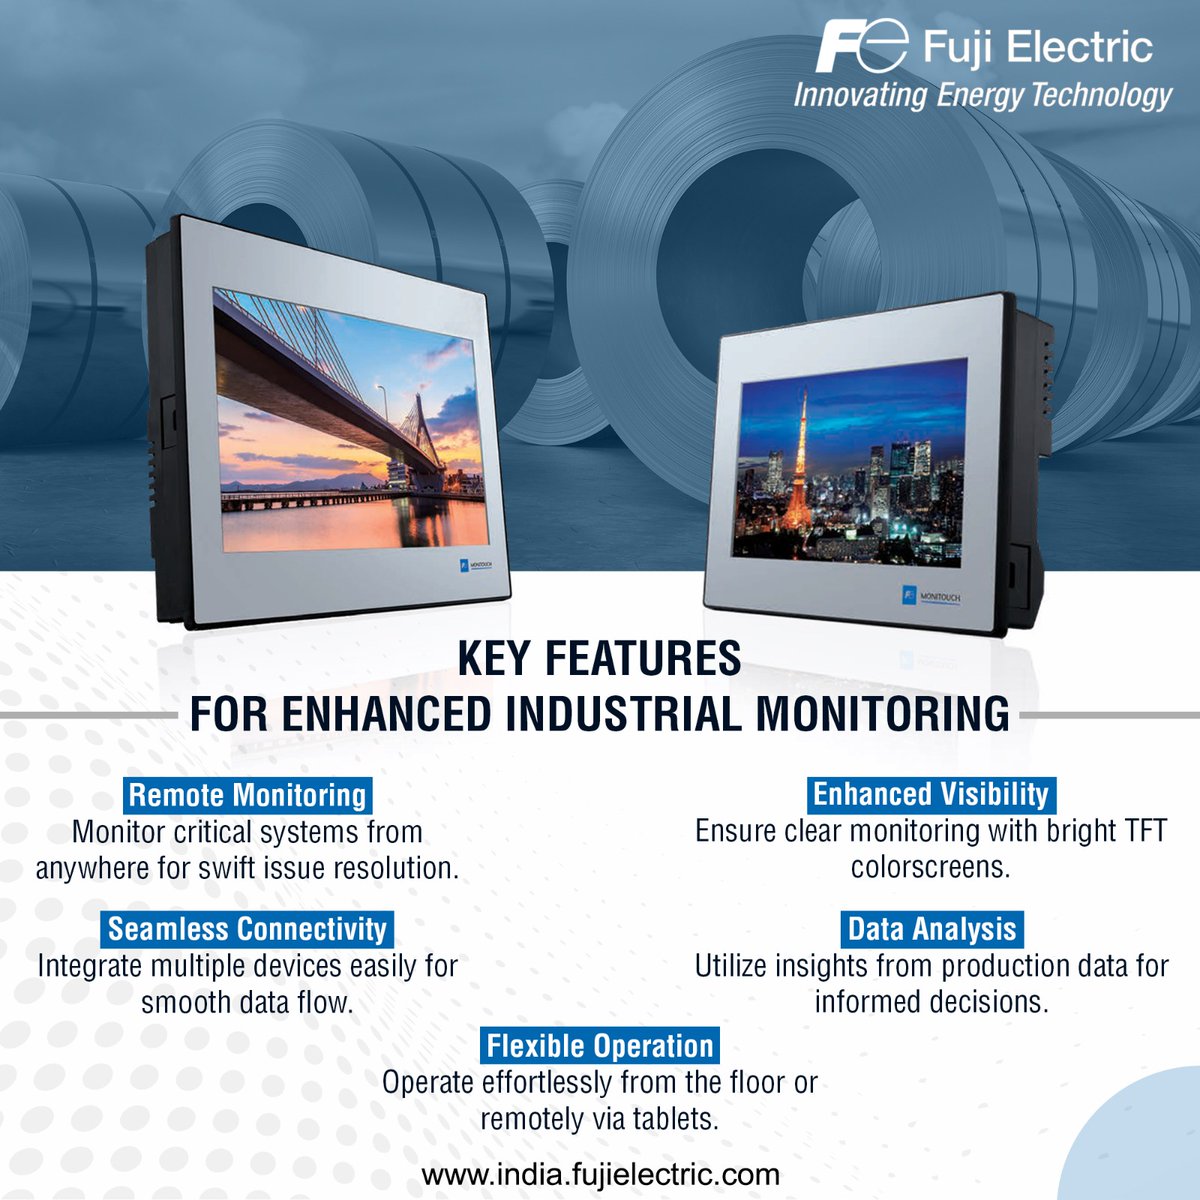 Empowering operators with intuitive HMIs, the MONITOUCH TECHNOSHOT series boosts efficiency in steel plants with reliable power backup and seamless monitoring.  india.fujielectric.com  
#Fujielectric #Fujielectricindia #Steelindustry #realtimemonitoring